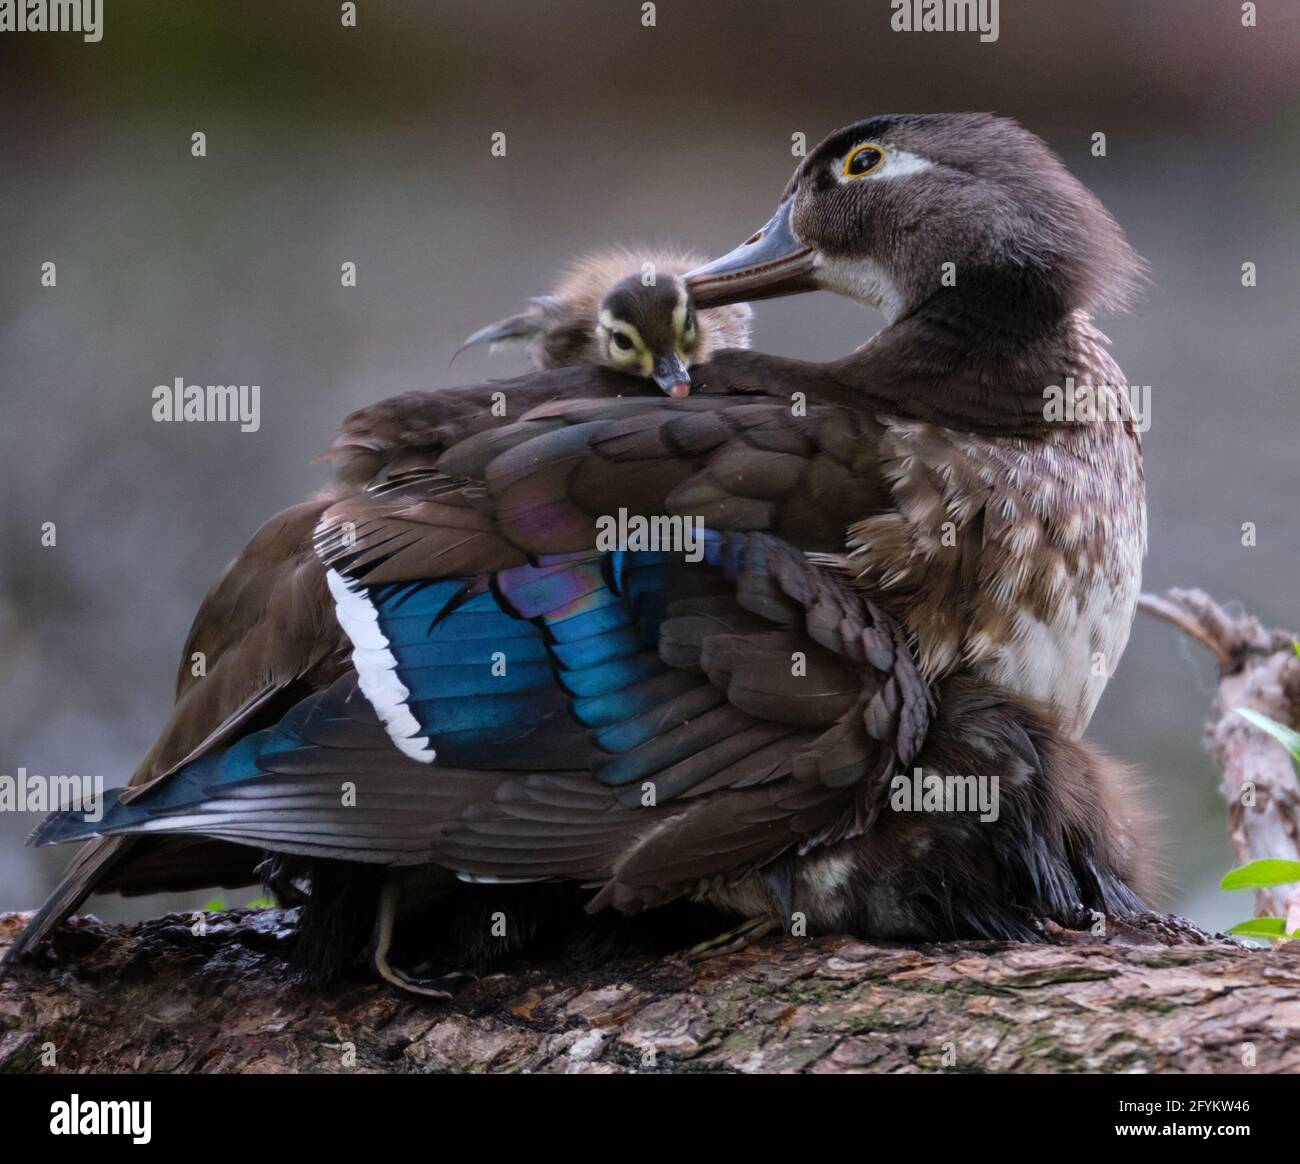 Female wood duck, Aix sponsa, helps her new born chick climb on her back while she covers the rest of her brood to provide them some warmth on a crisp spring day. Stock Photo